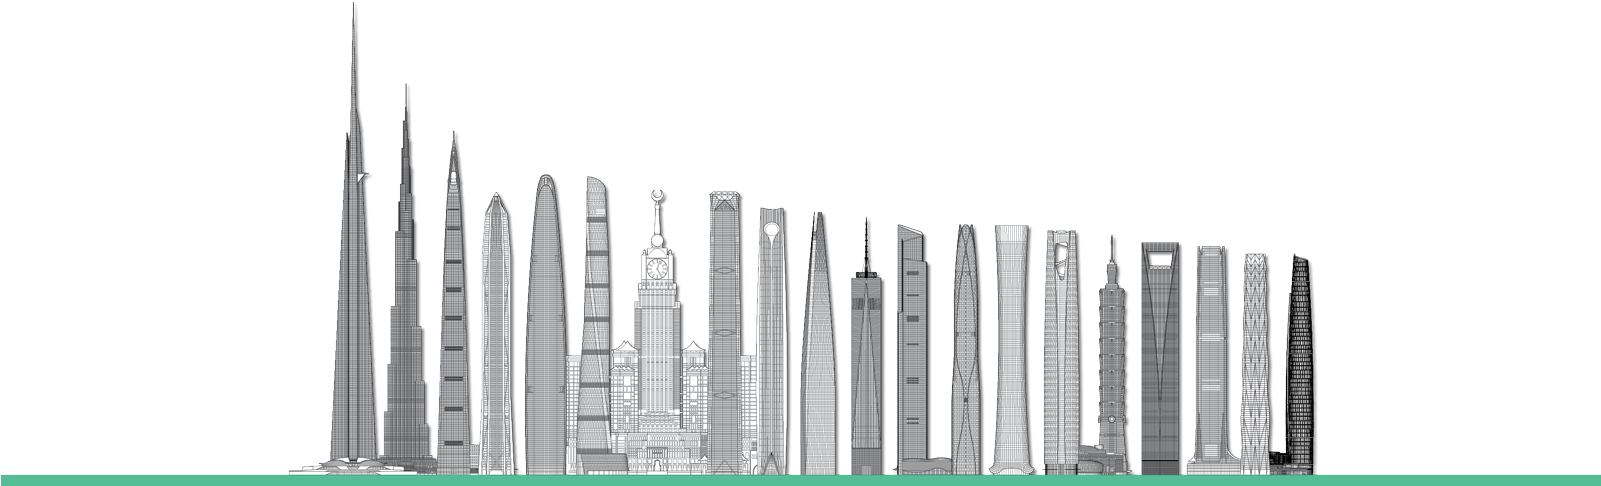 100 Tallest Buildings - Tower Block (1600x744), Png Download